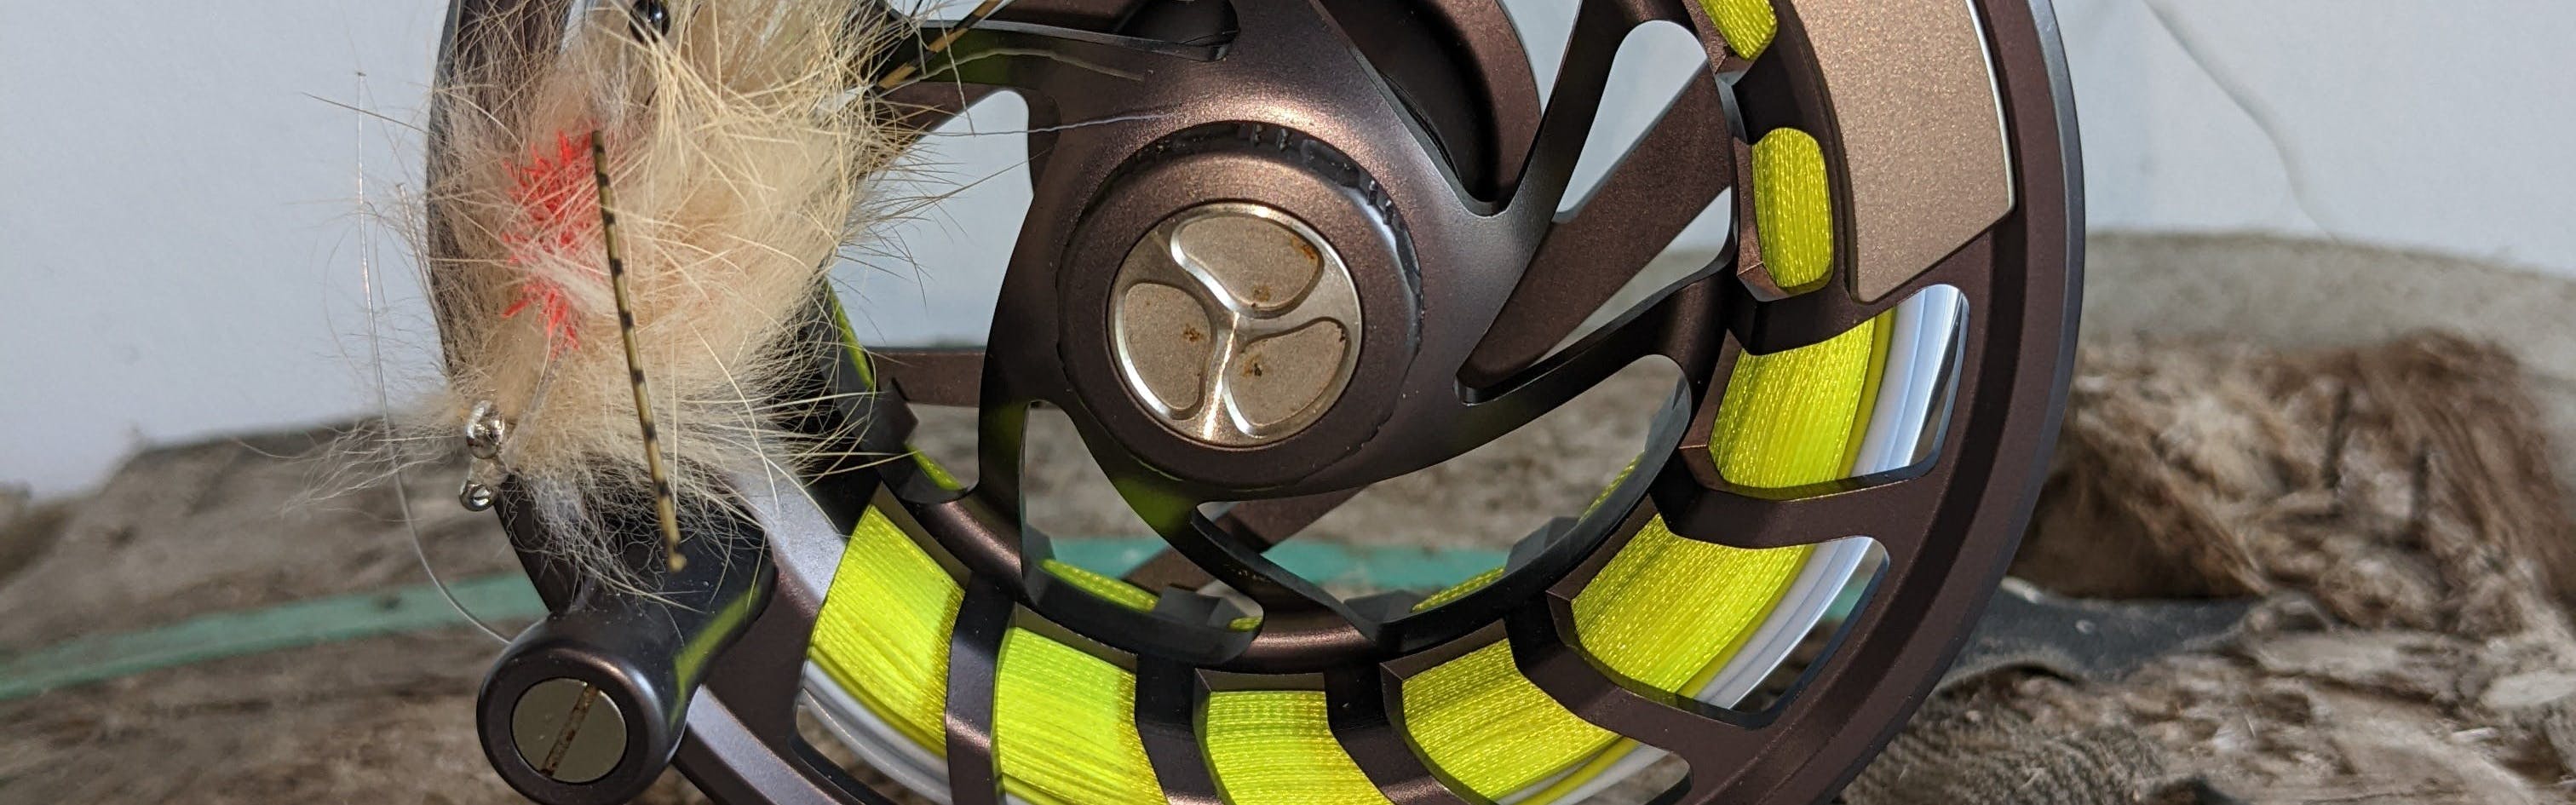 .com : Orvis Fly Fishing - Mirage USA Made Fly Fishing Reels